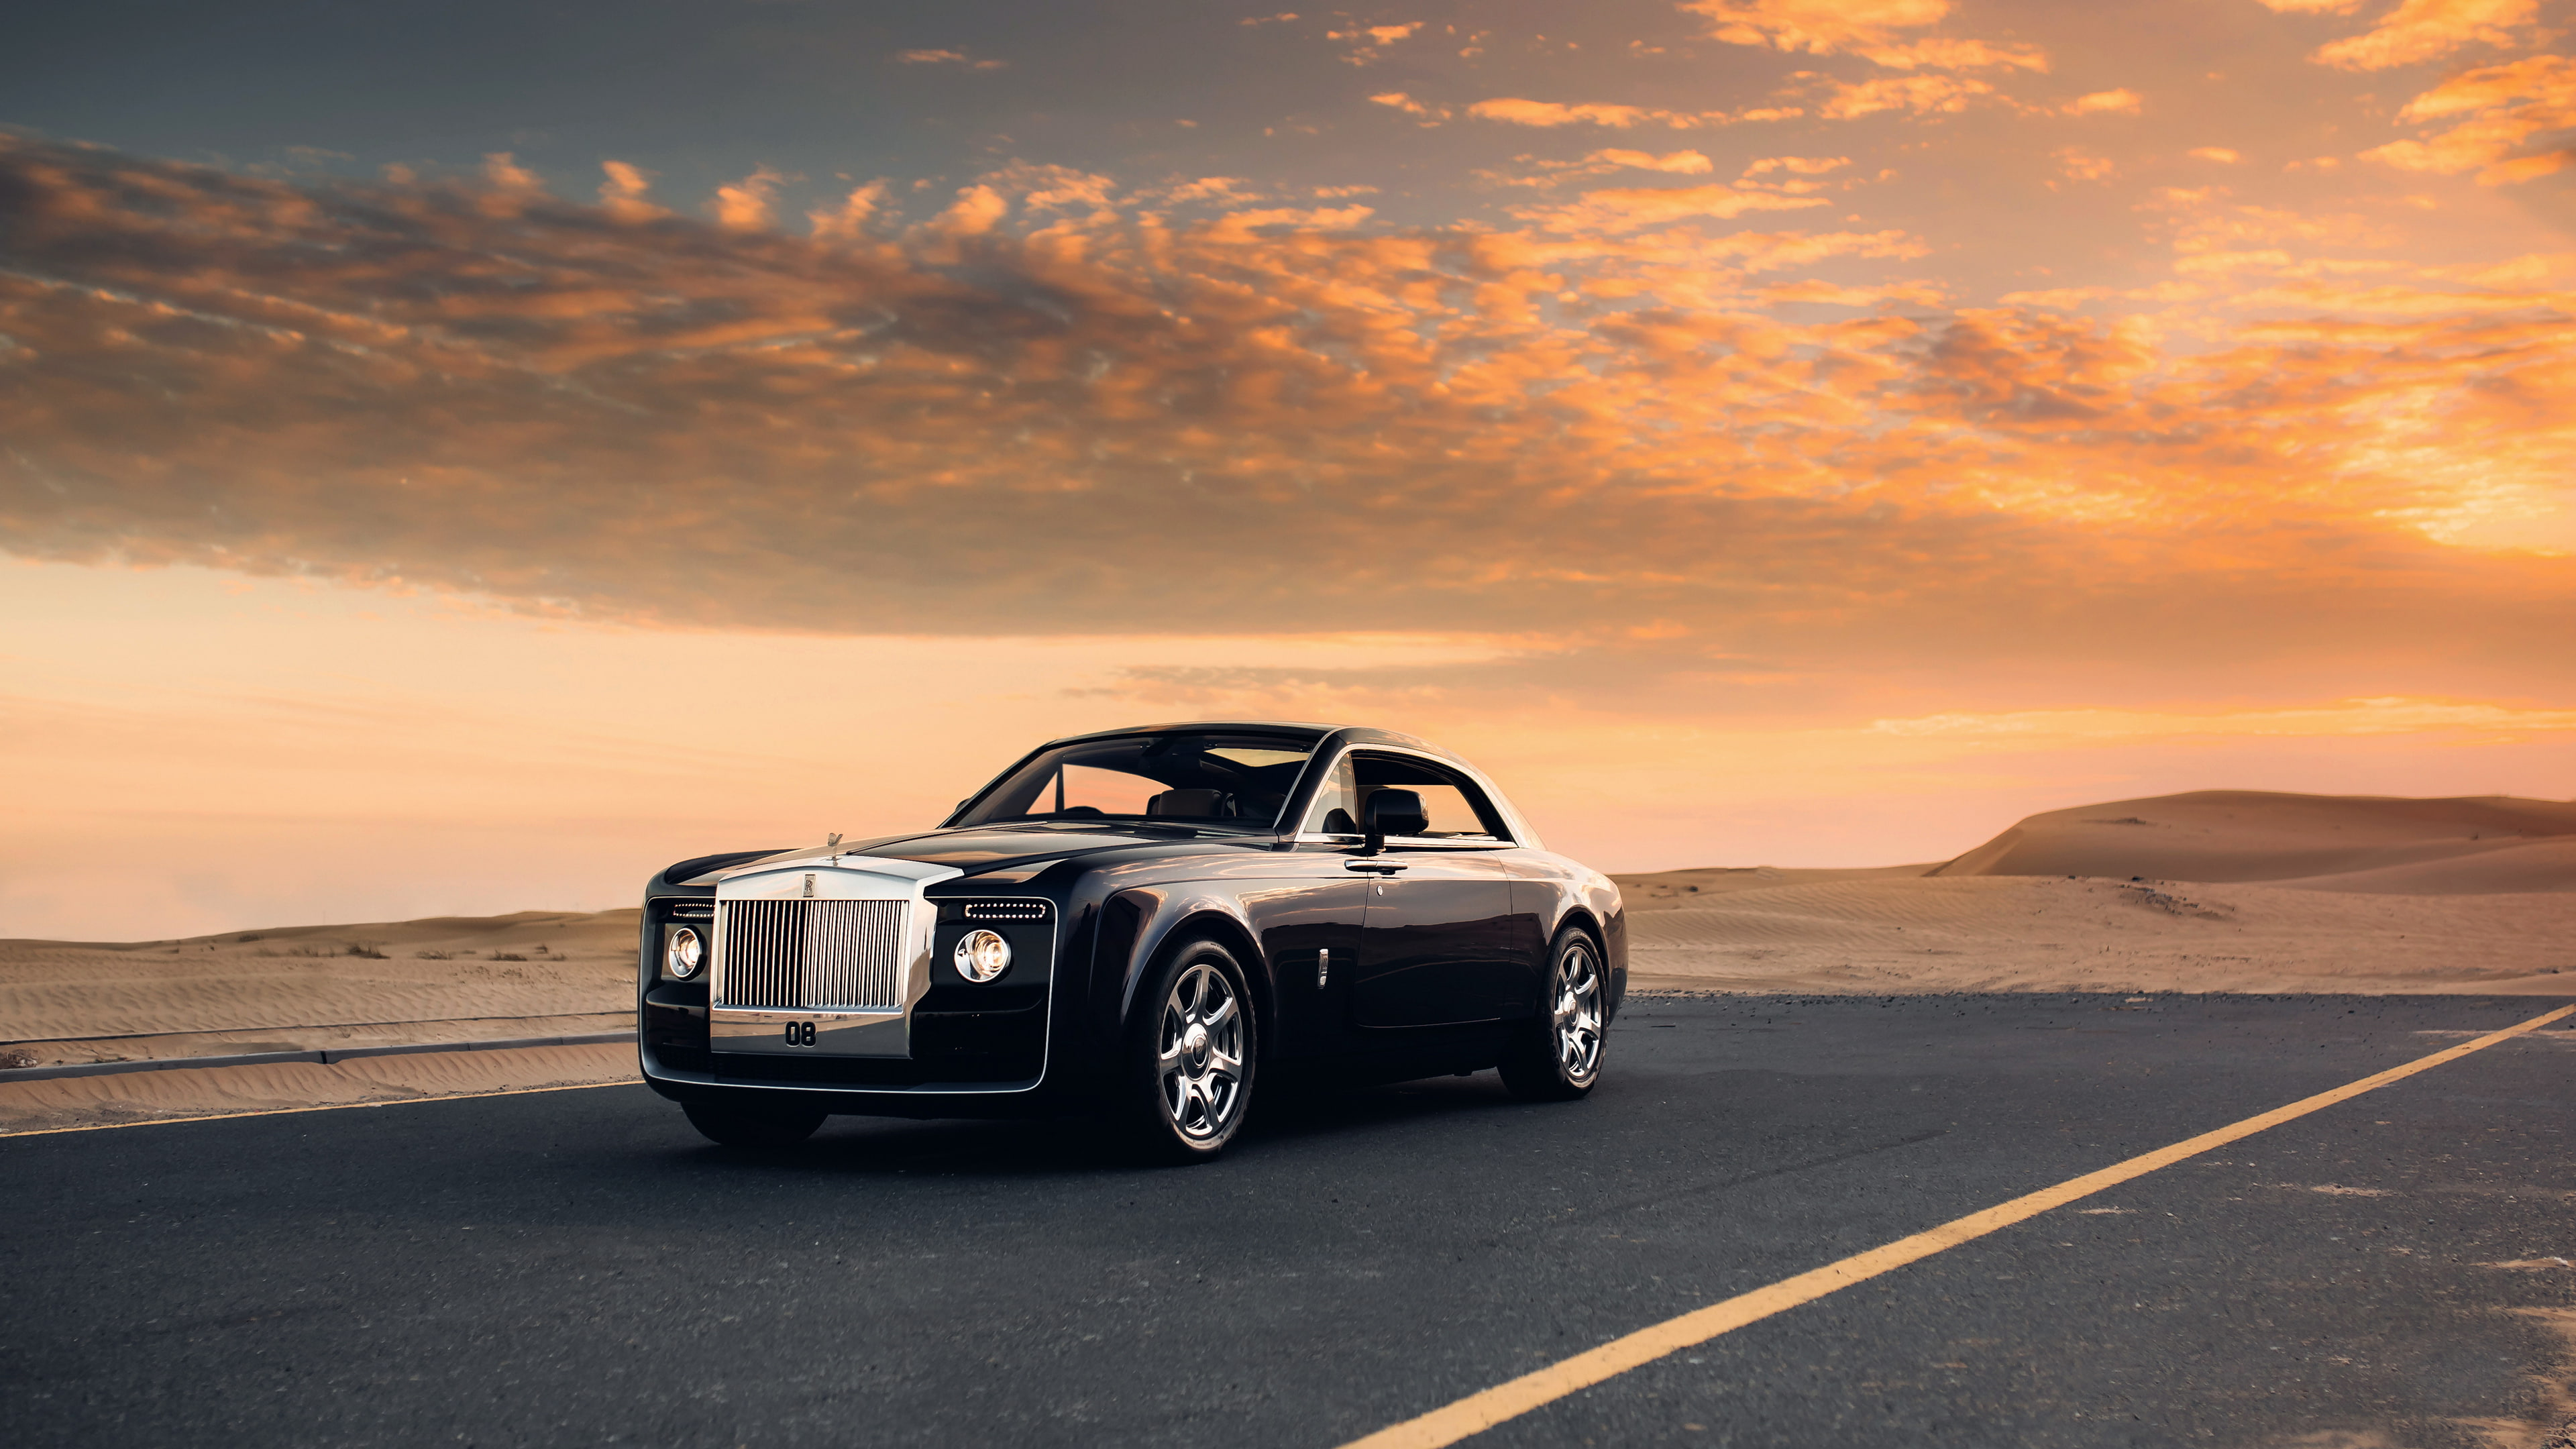 RollsRoyce unveils oneoff Sweptail  carsalescomau